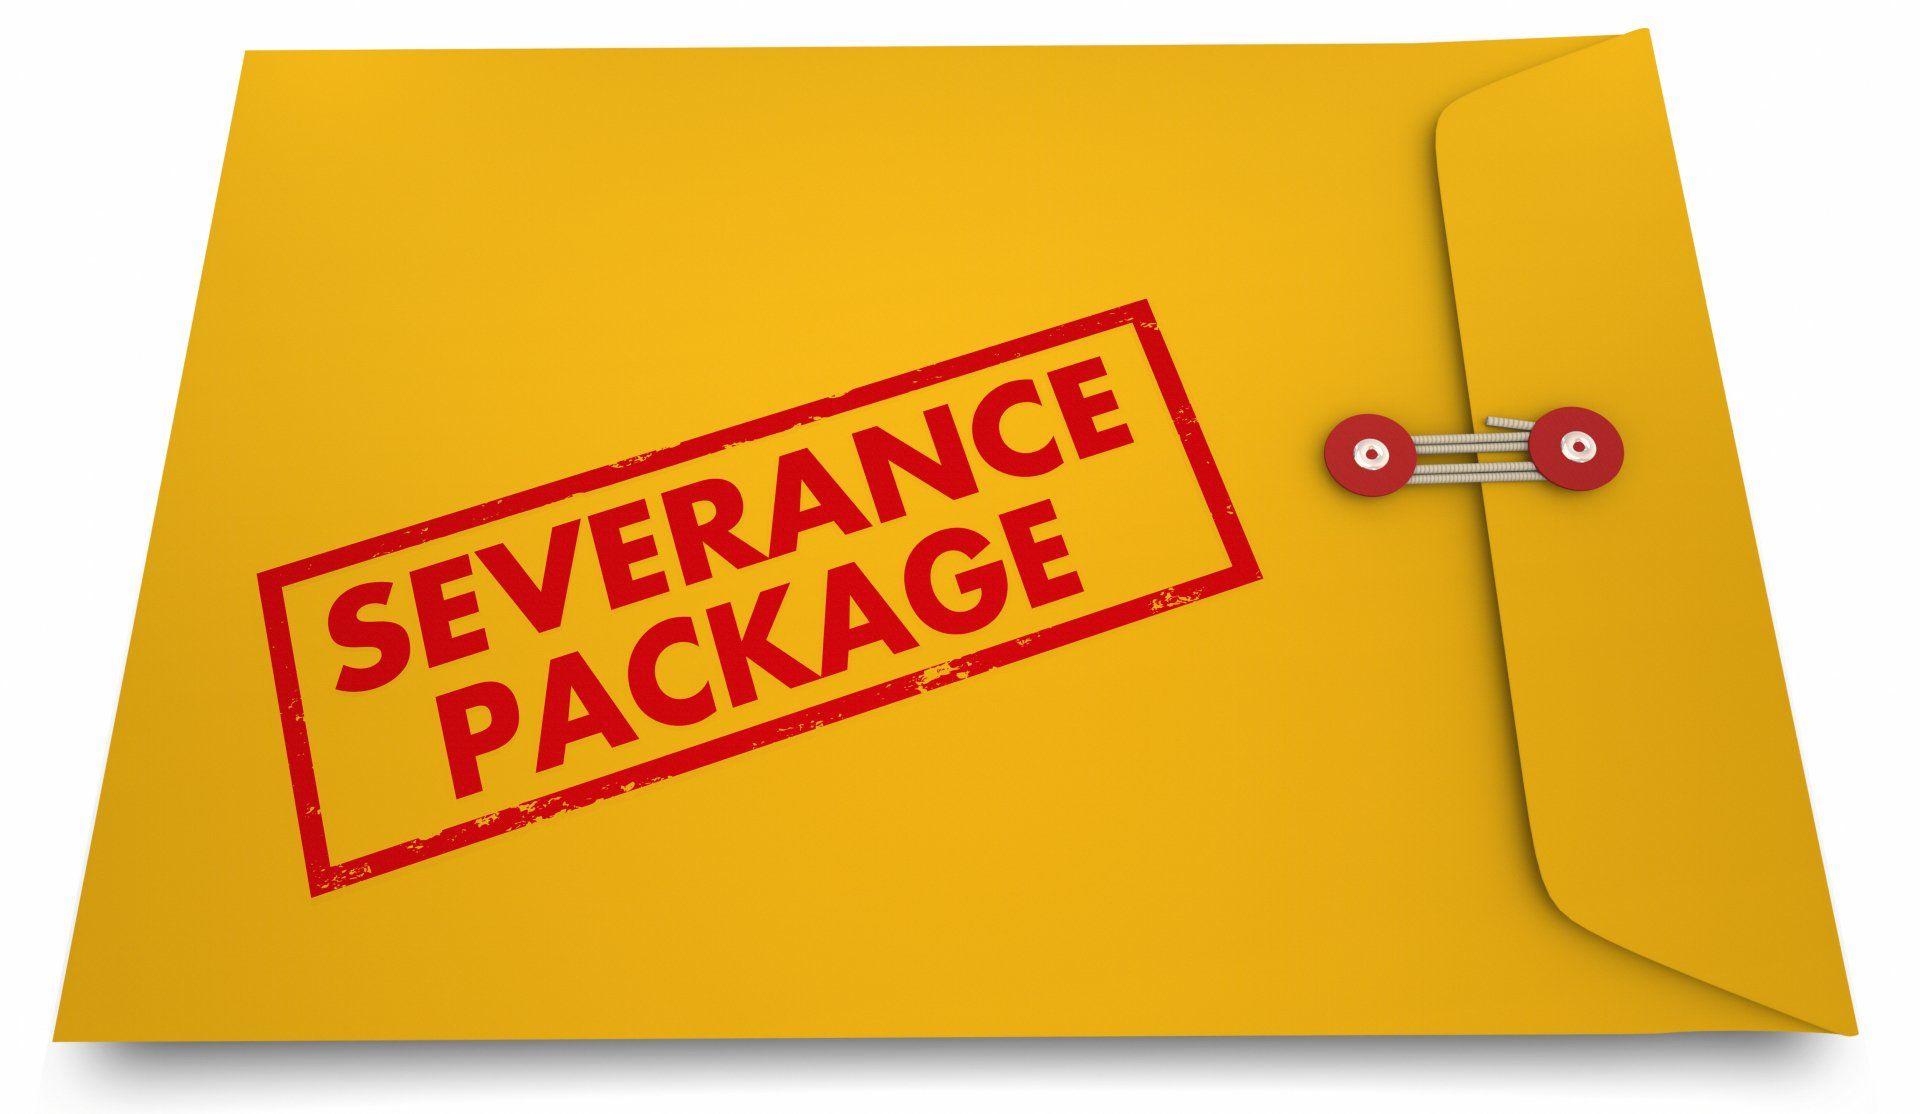 Yellow folder with Severance Package written in red on it